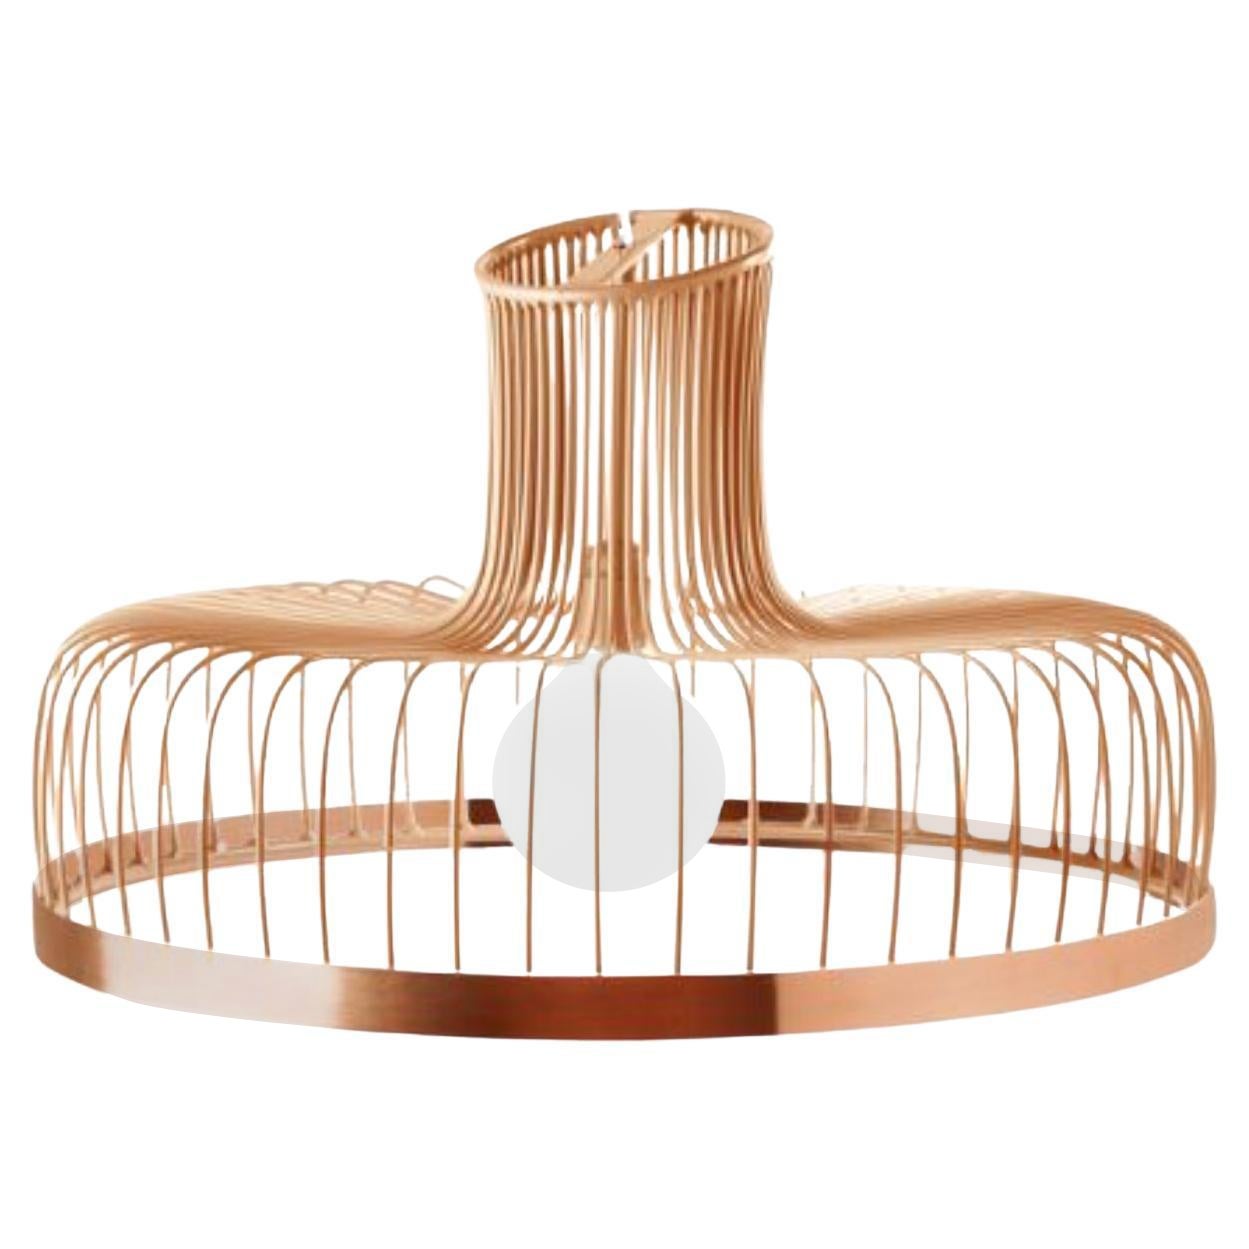 Salmon New Spider Suspension Lamp with Copper Ring by Dooq